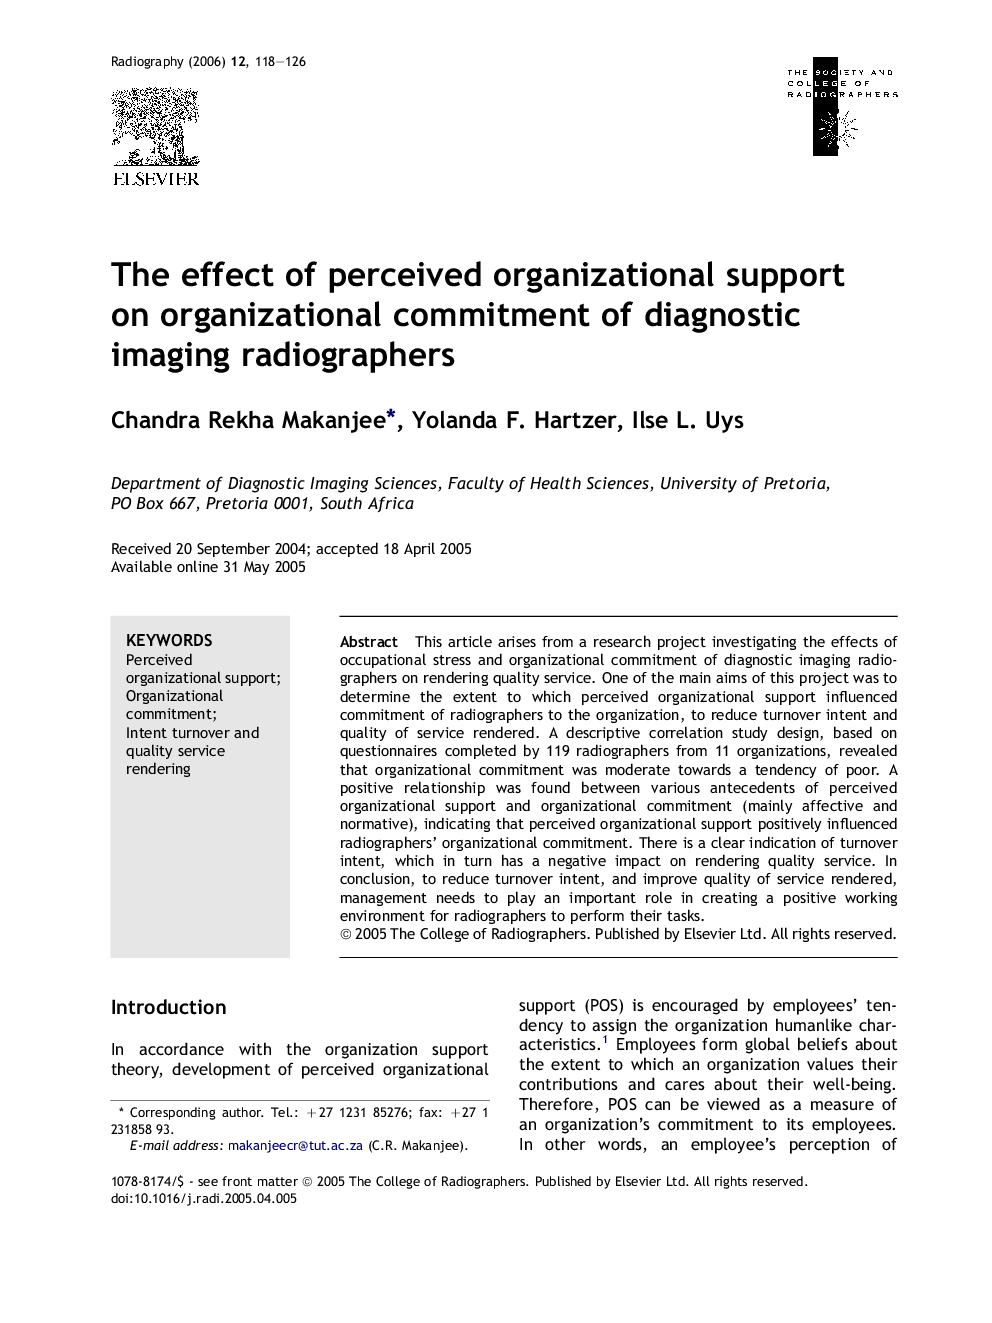 The effect of perceived organizational support on organizational commitment of diagnostic imaging radiographers